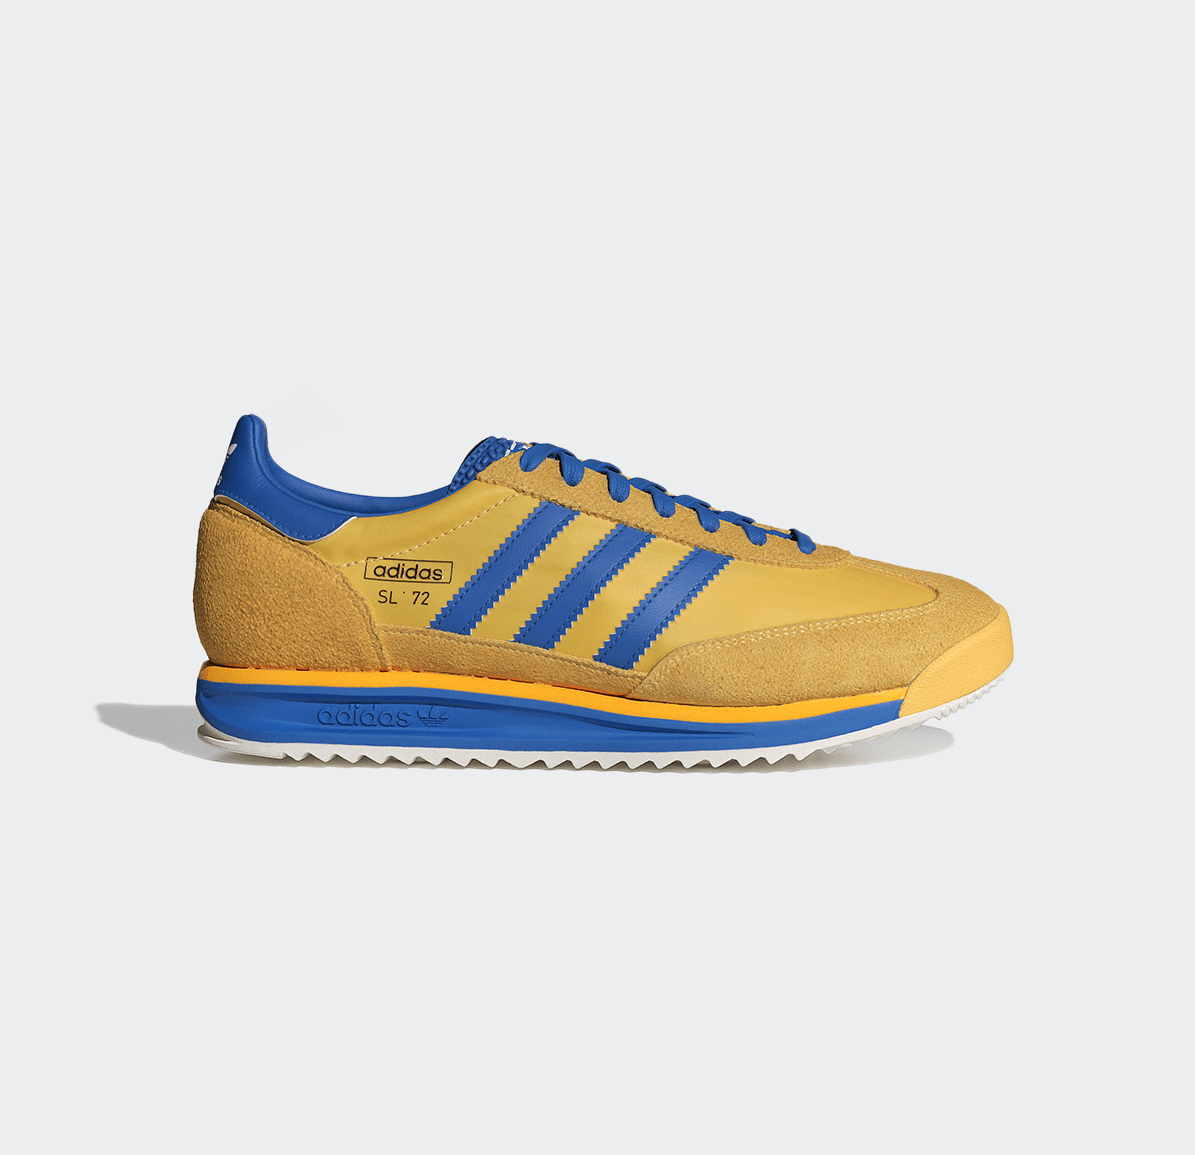 Adidas SL 72 RS - Utility Yellow/Blue Royal/Cloud White - Adidas - State Of Play